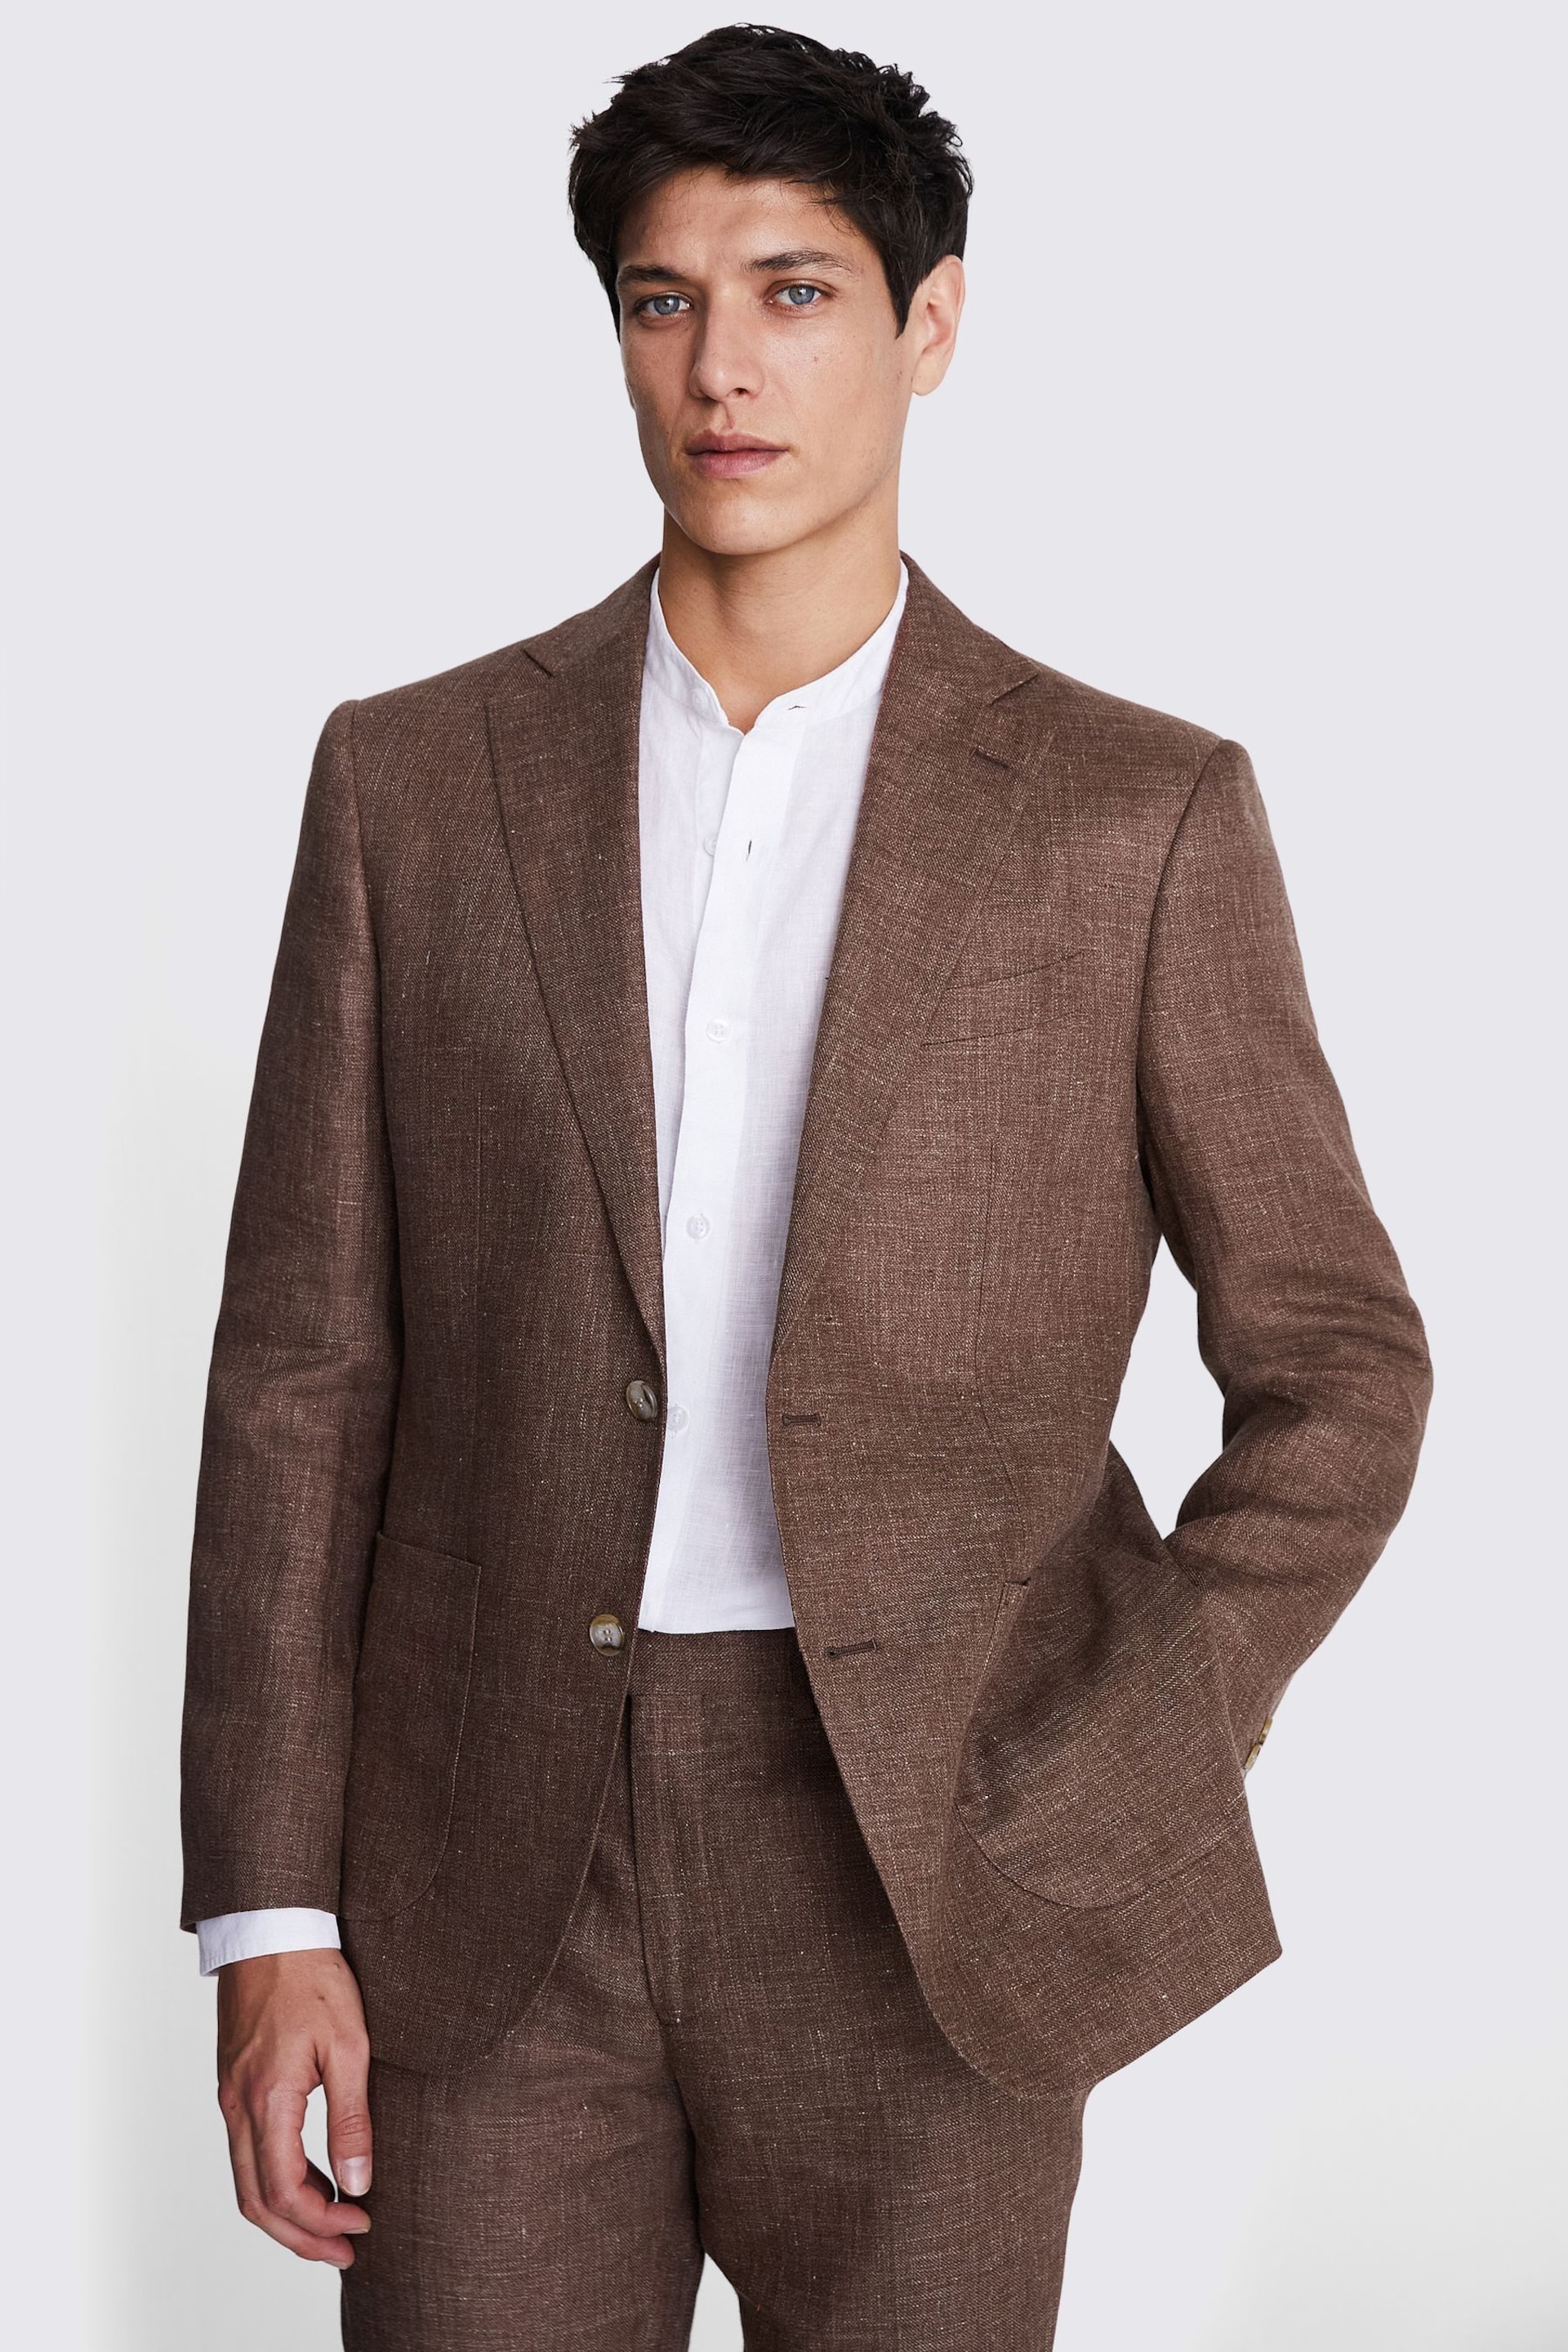 MOSS Tailored Fit Copper Linen Brown Jacket - Image 1 of 4